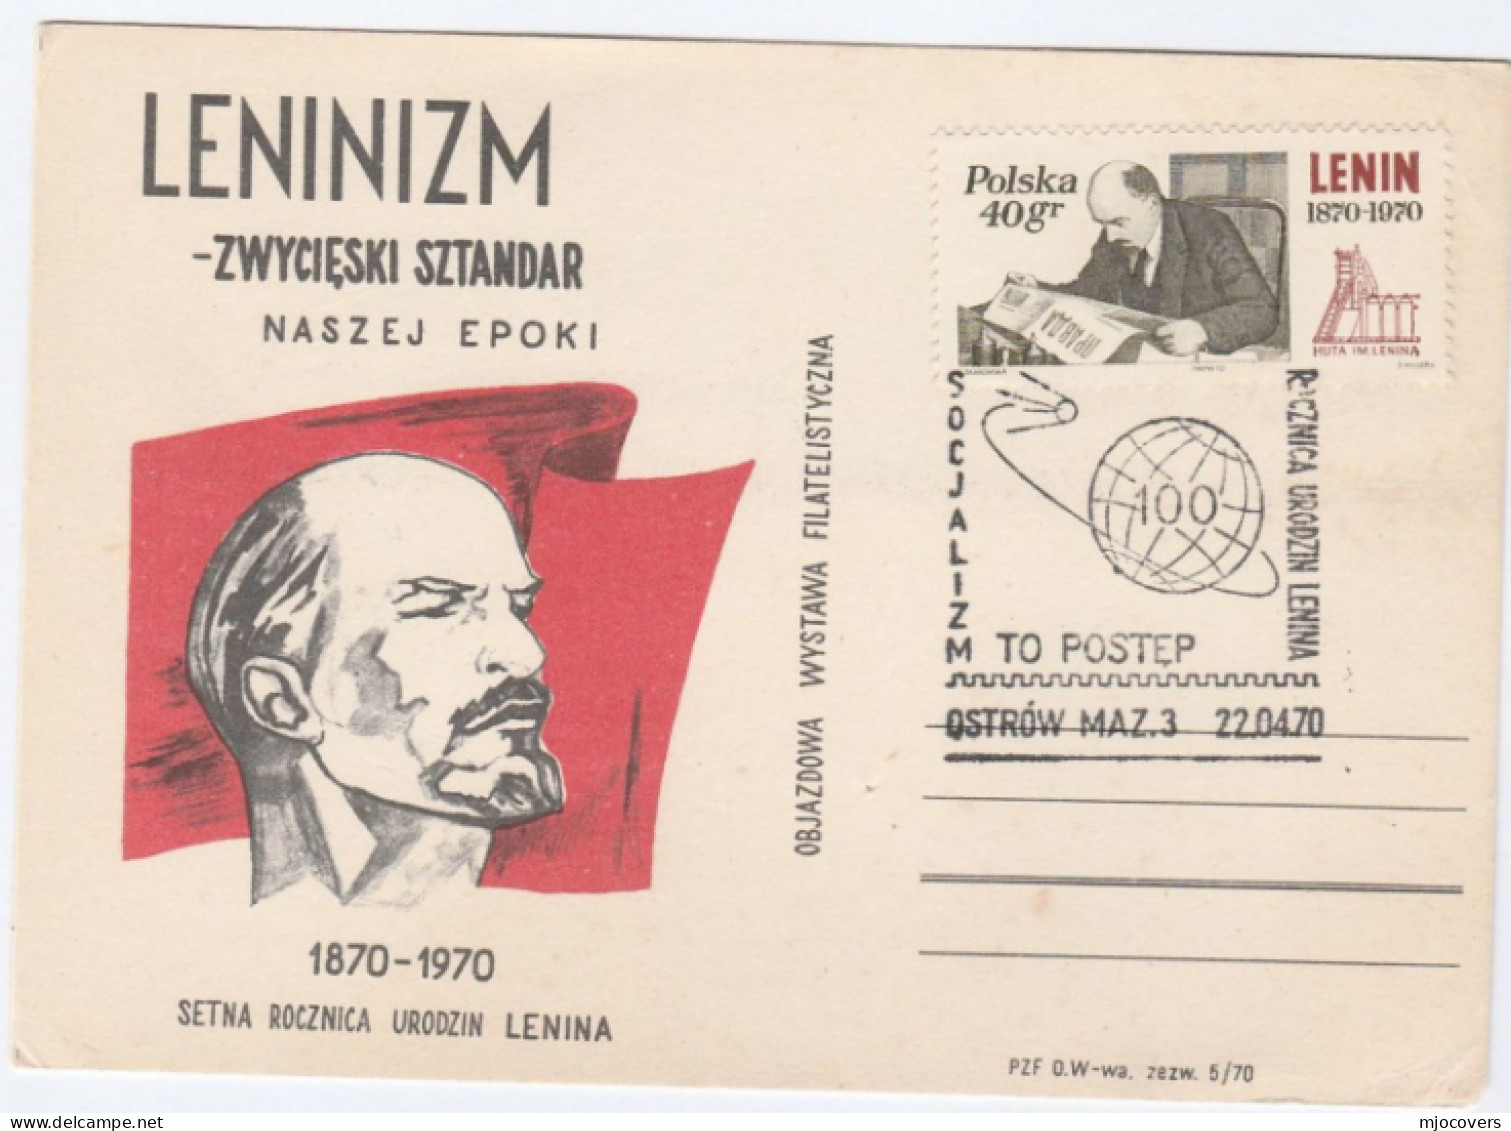 1970 OSTROW Poland LENIN Special FDC Cover Stamps Card - Lenin